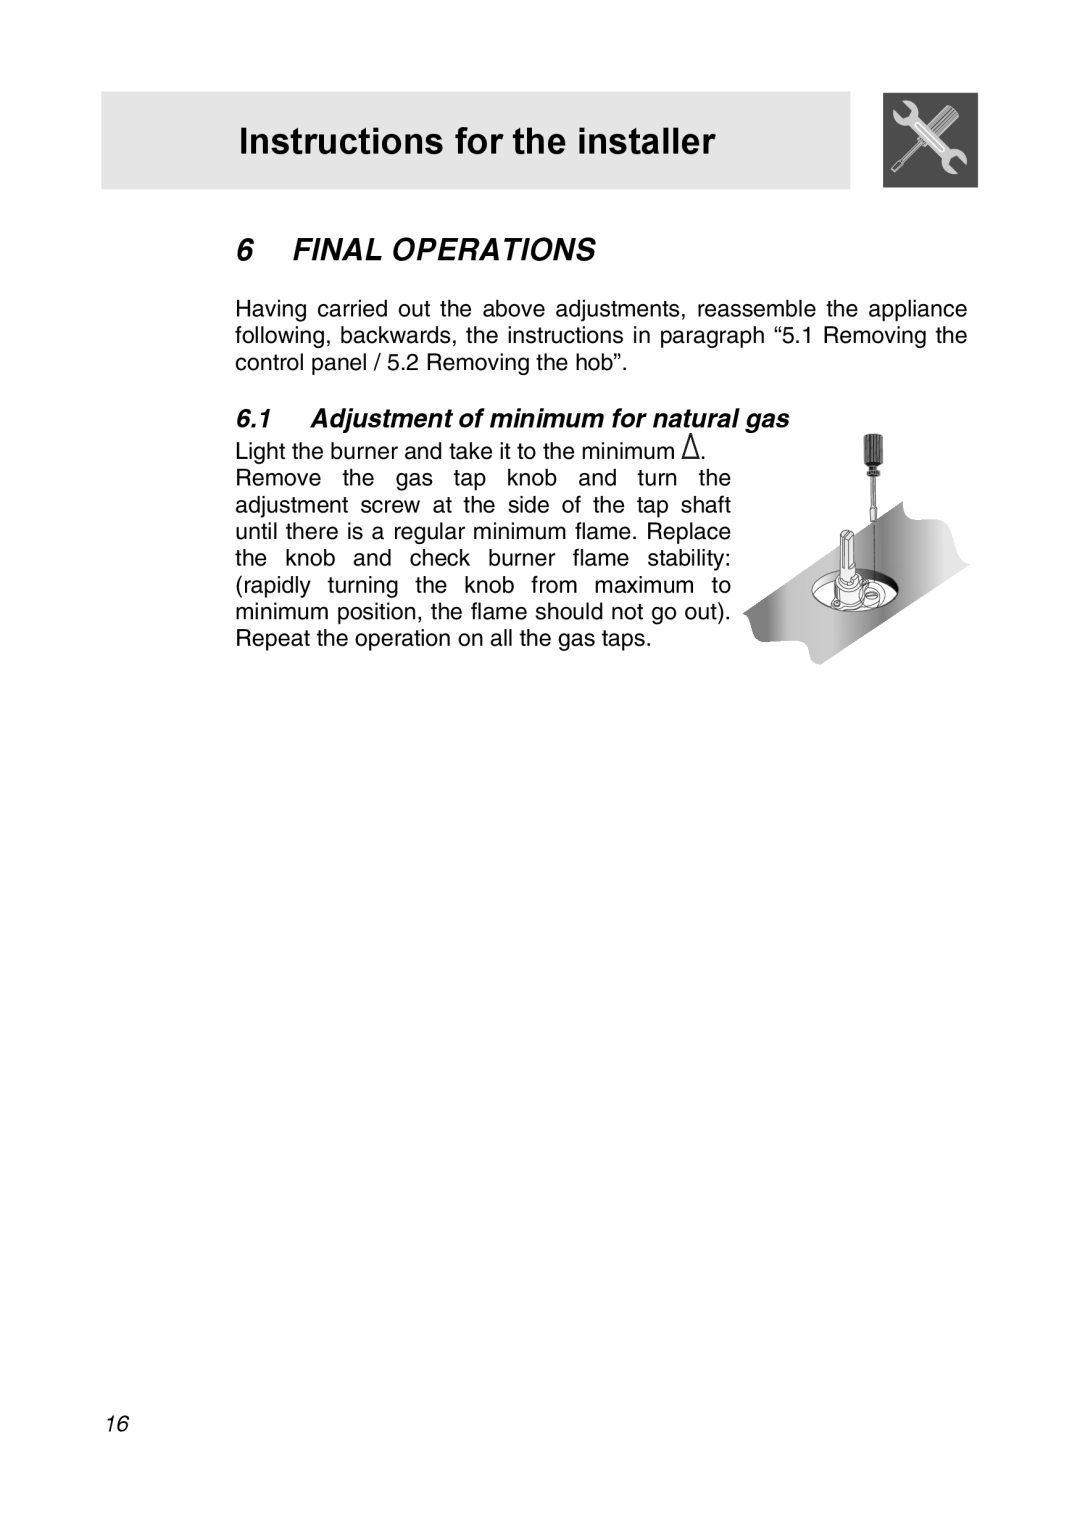 Smeg CIR34AX3 manual Final Operations, Adjustment of minimum for natural gas, Instructions for the installer 